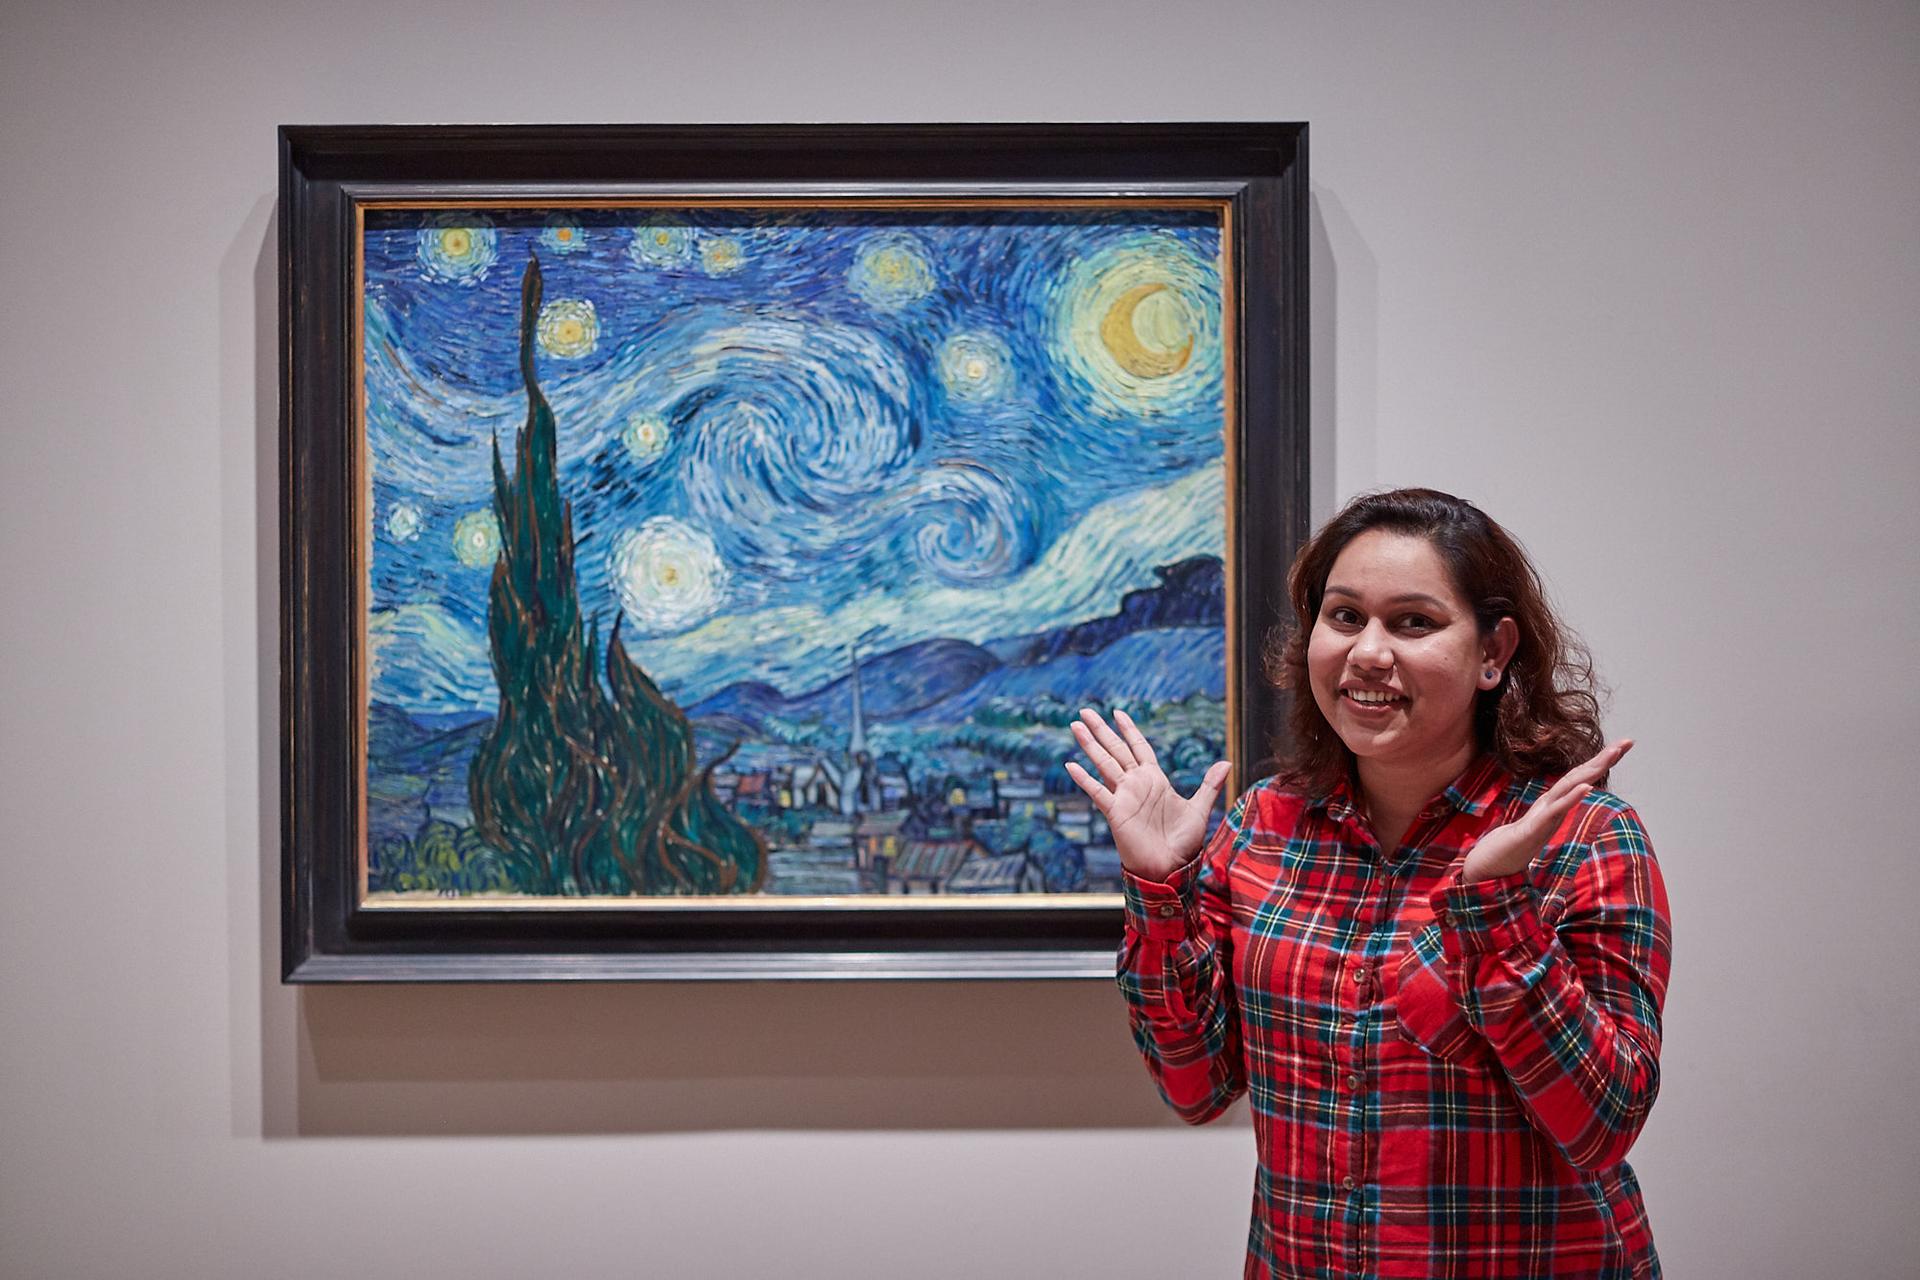 A woman in a red-checkered shirt poses in front of Vincent van Gogh's famous painting, 